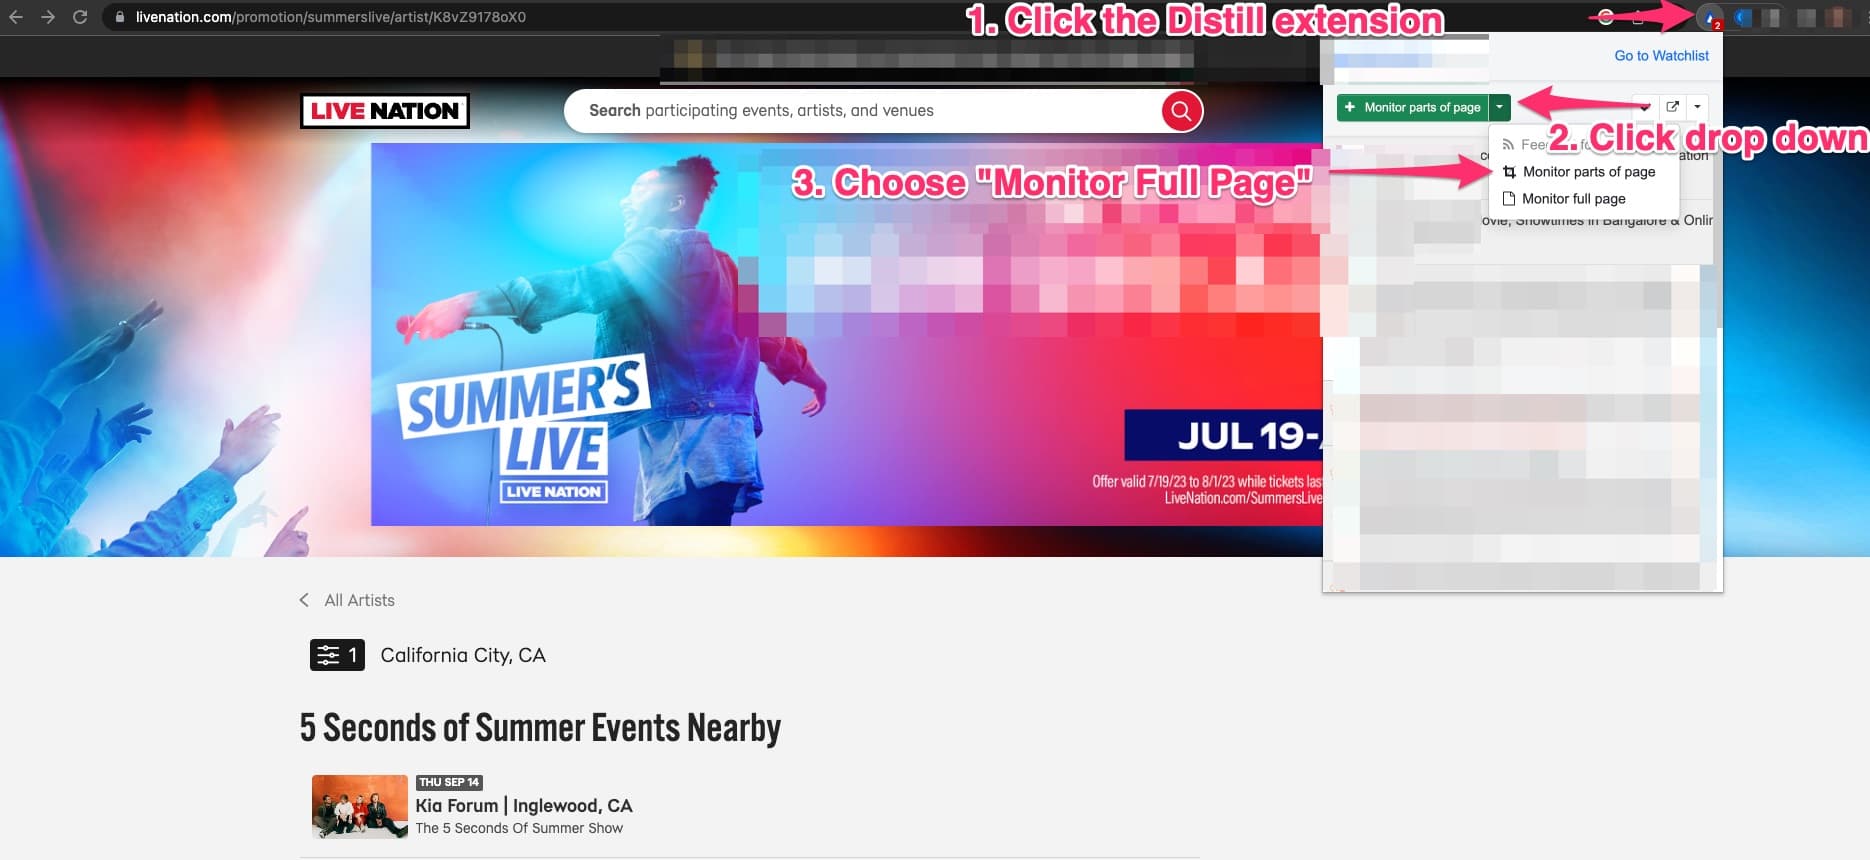 Get updates about upcoming events and concert dates on Ticketmaster